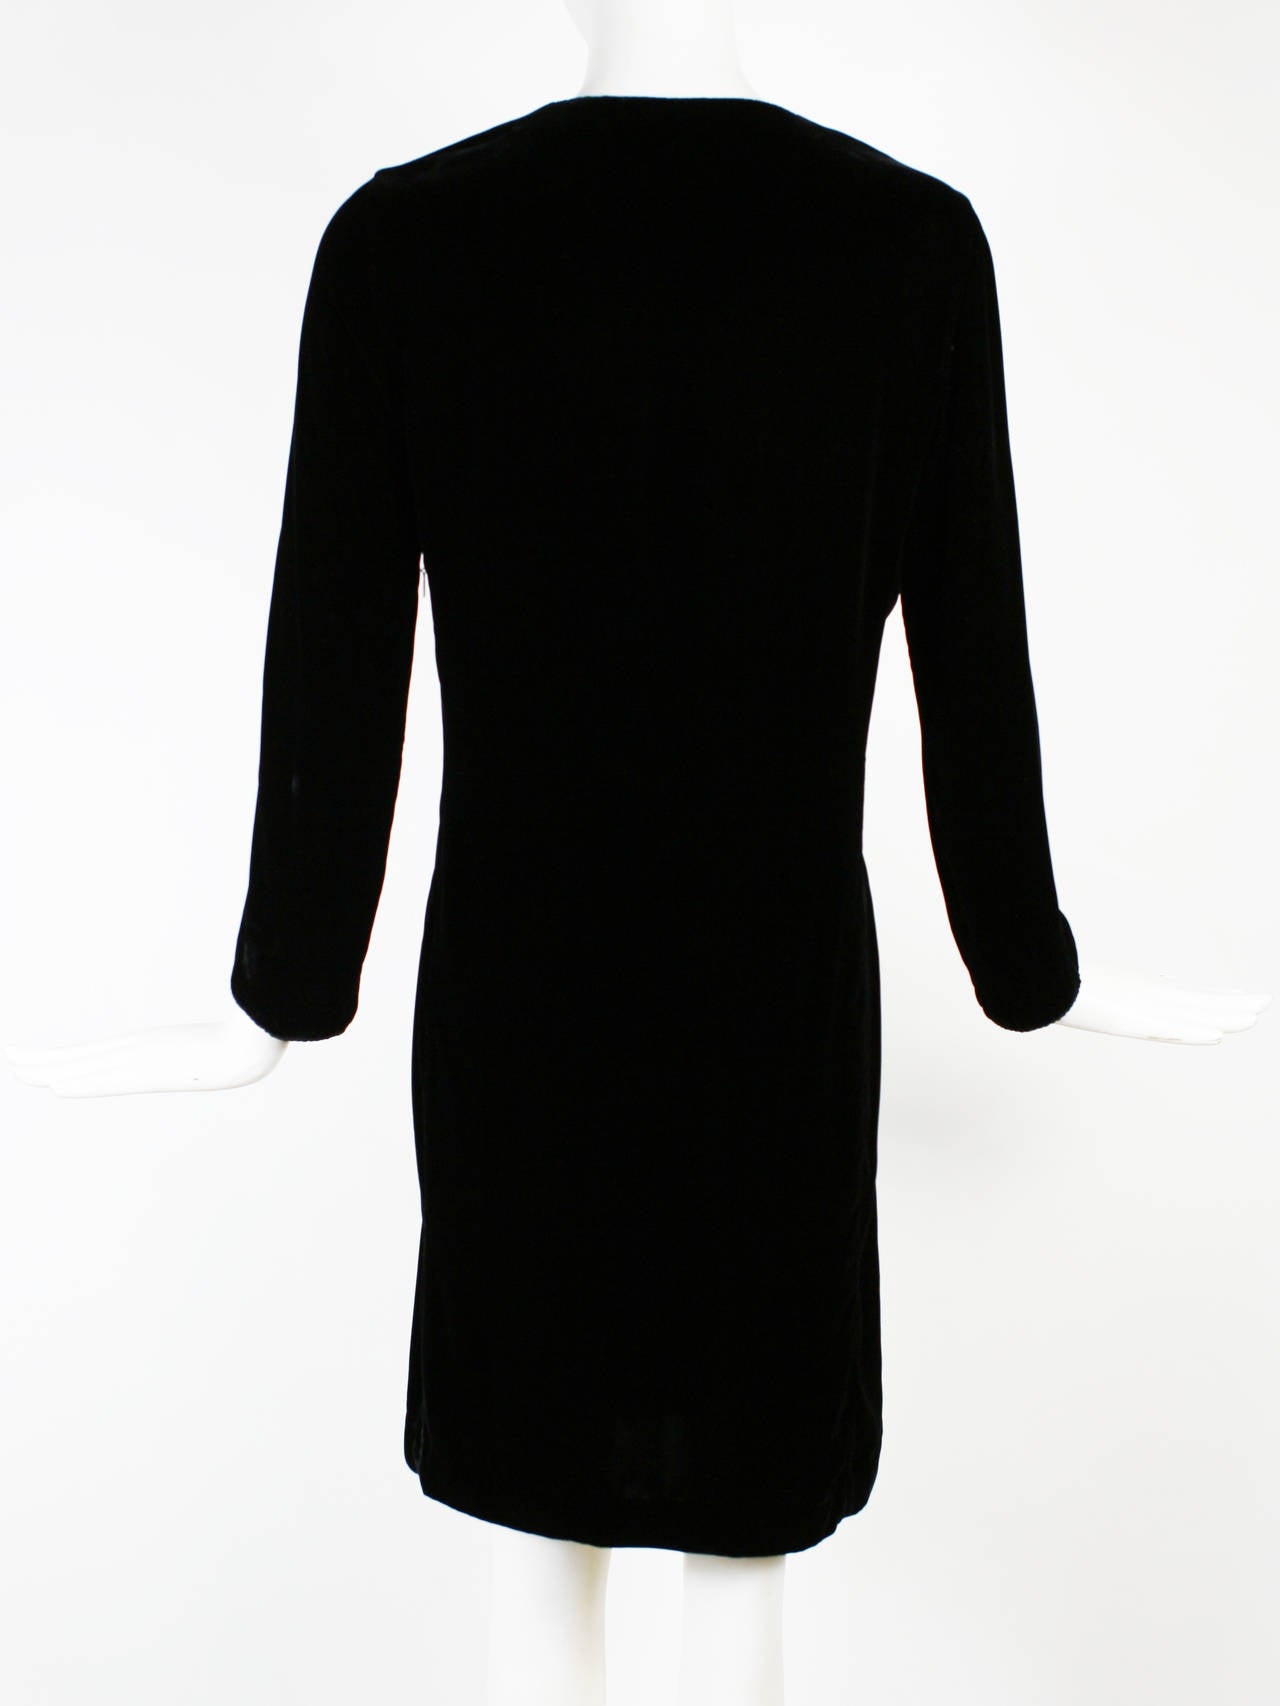 Tom Ford for GUCCI 1990s Black Peasant Style Dress For Sale 1